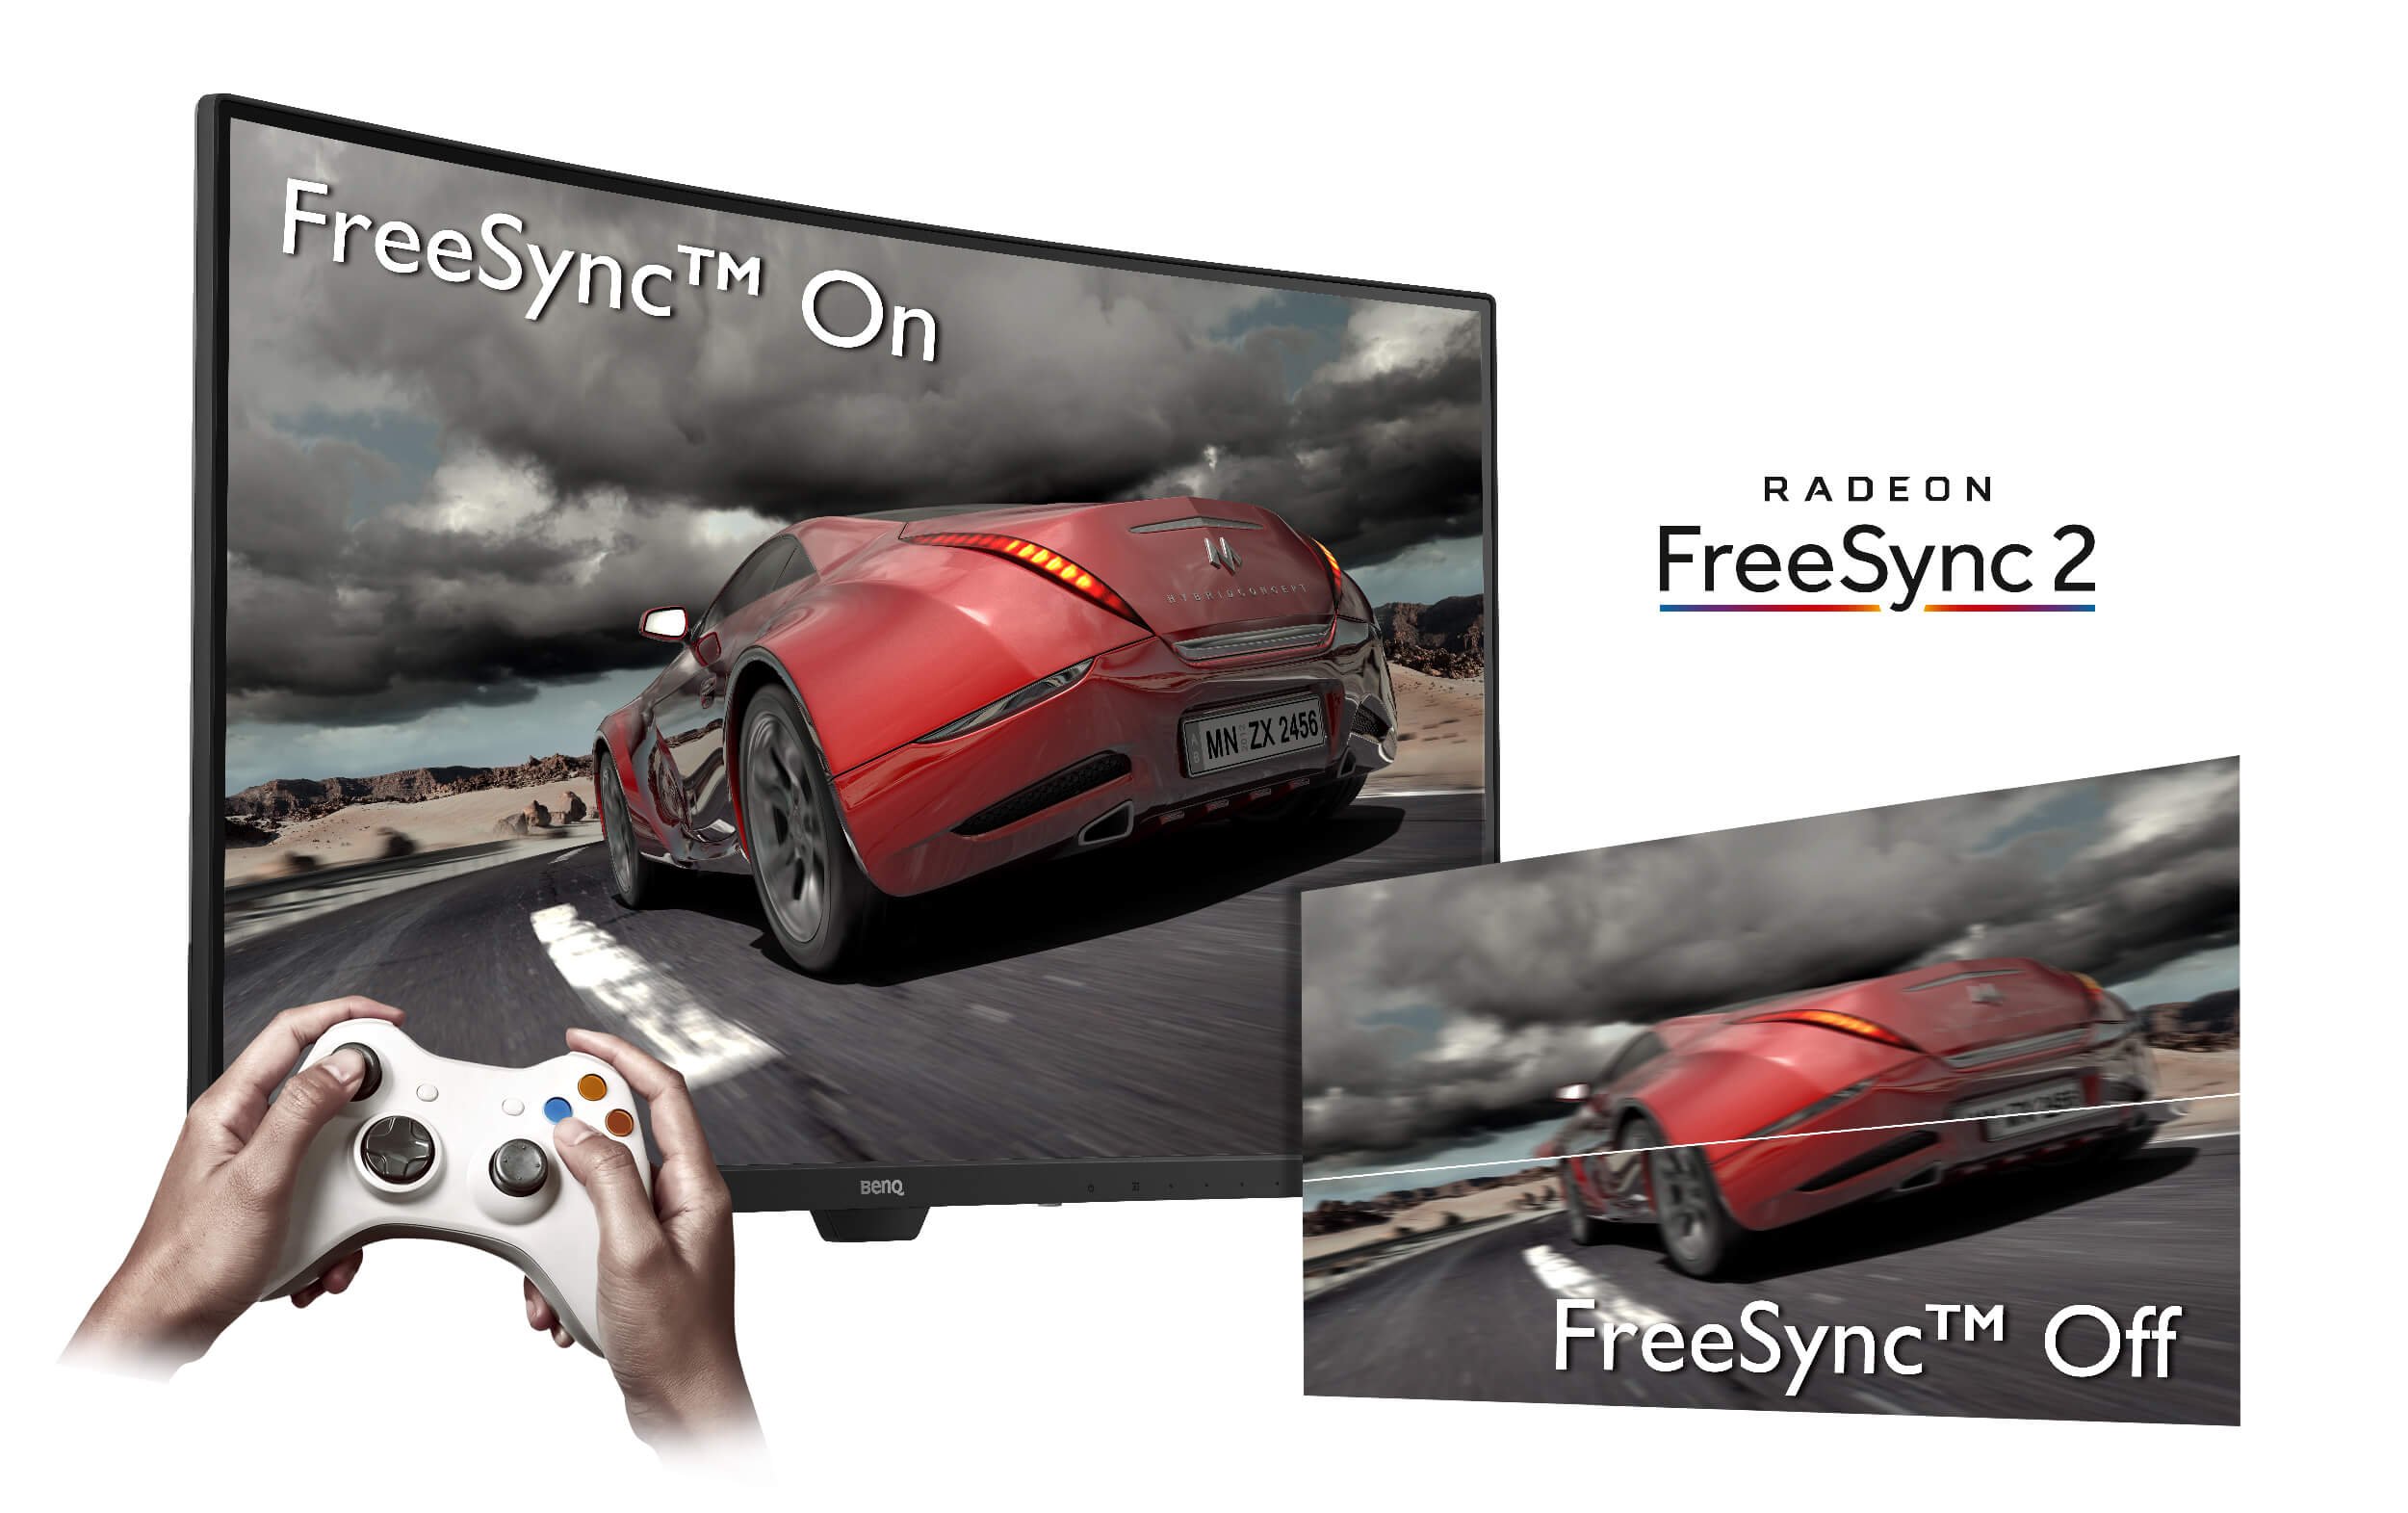 FreeSync compatible monitors prevent tearing up of the image.